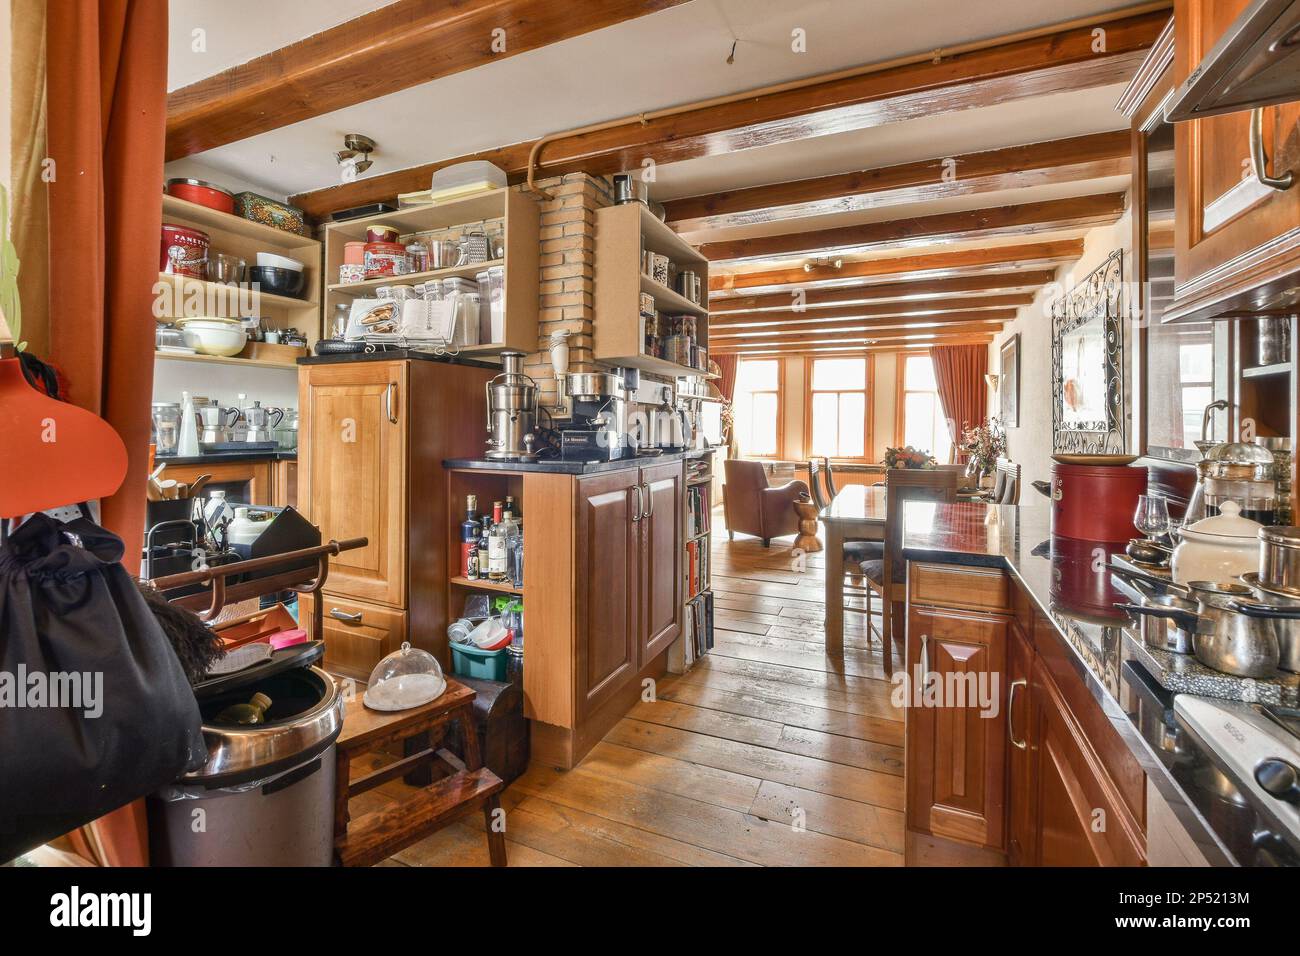 Amsterdam, Netherlands - 10 April, 2021: a kitchen and dining area in an old house with wood floors, wooden cabinets, stainless appliances and stoves Stock Photo